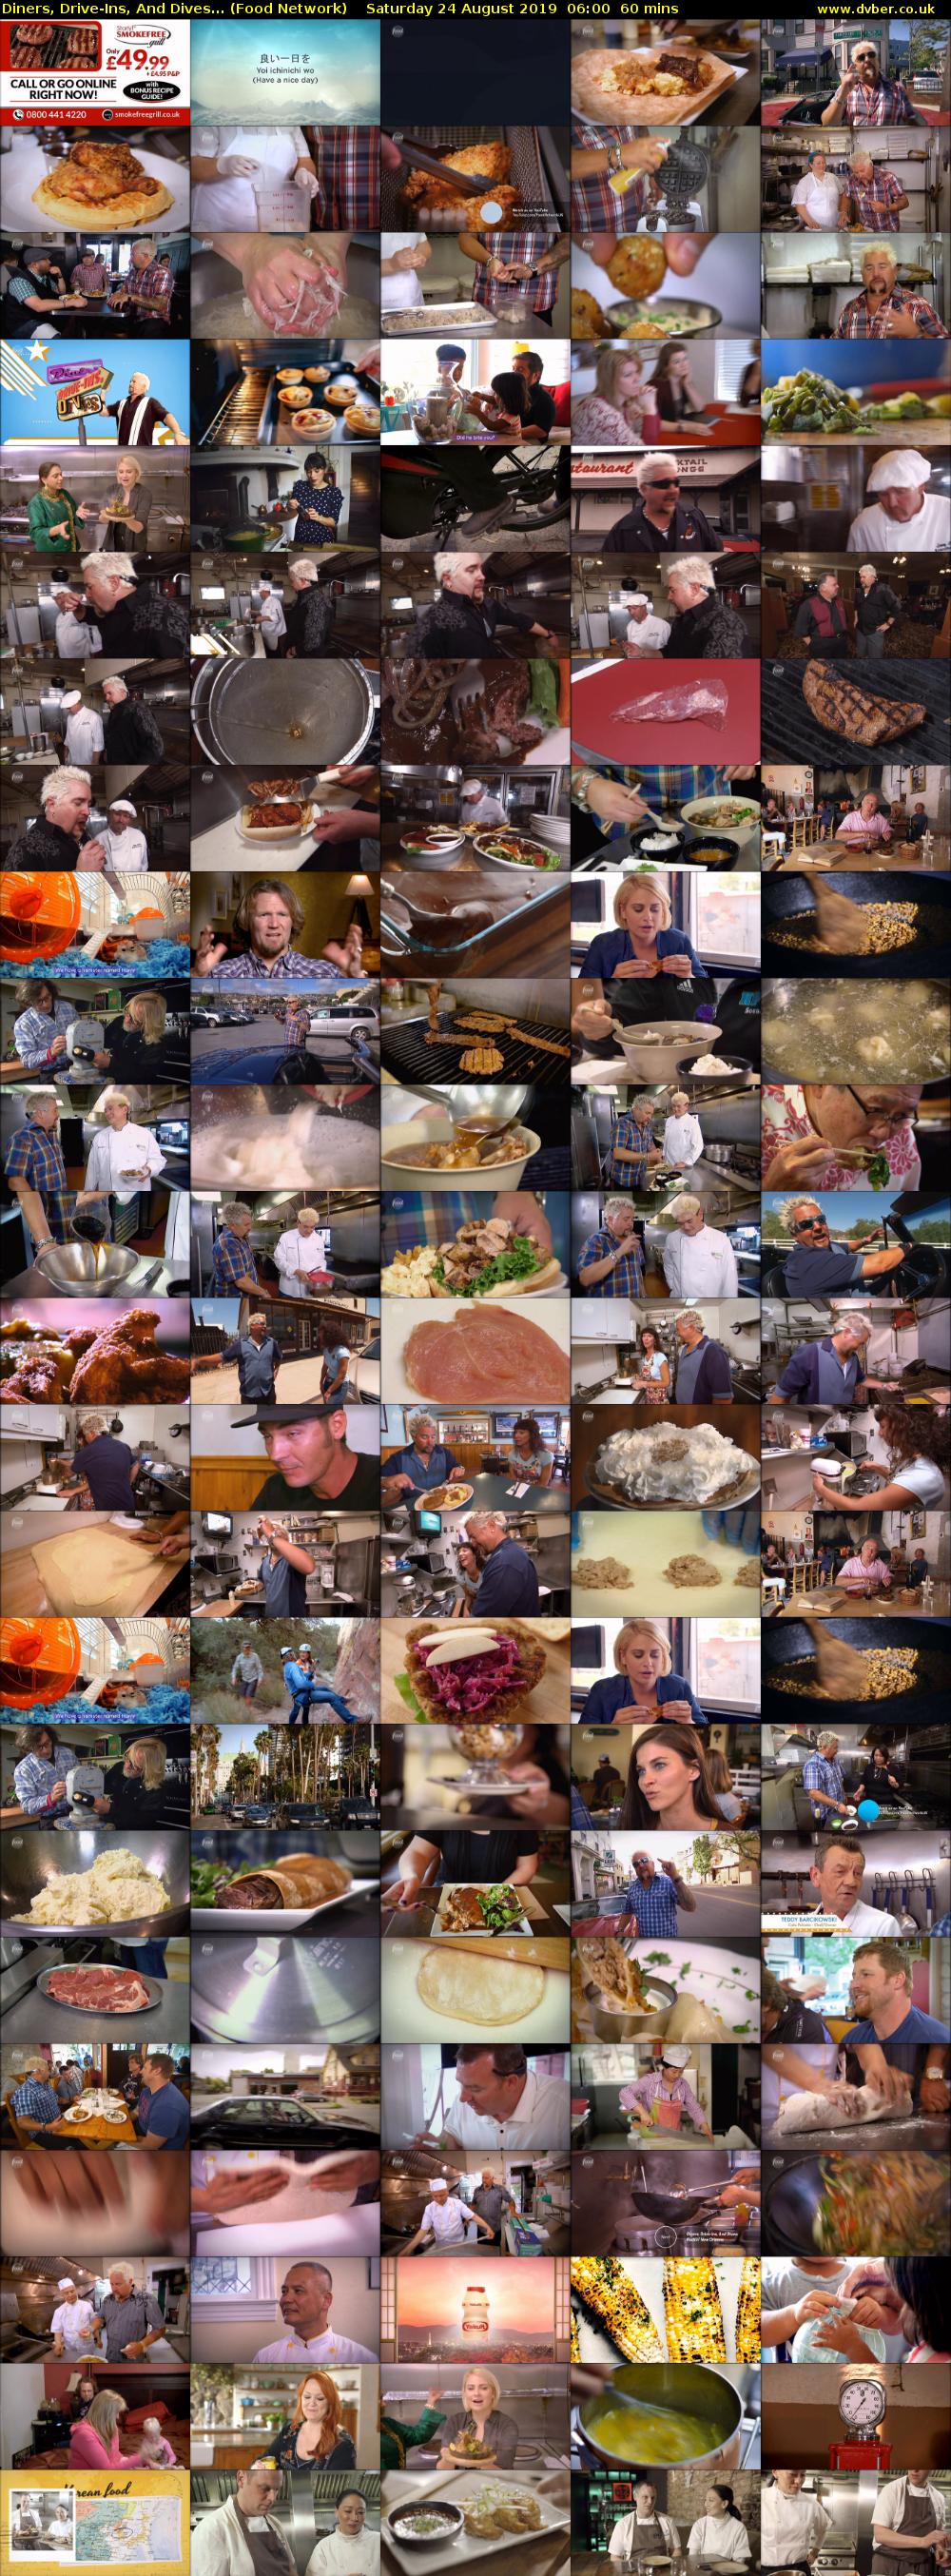 Diners, Drive-Ins, And Dives... (Food Network) Saturday 24 August 2019 06:00 - 07:00